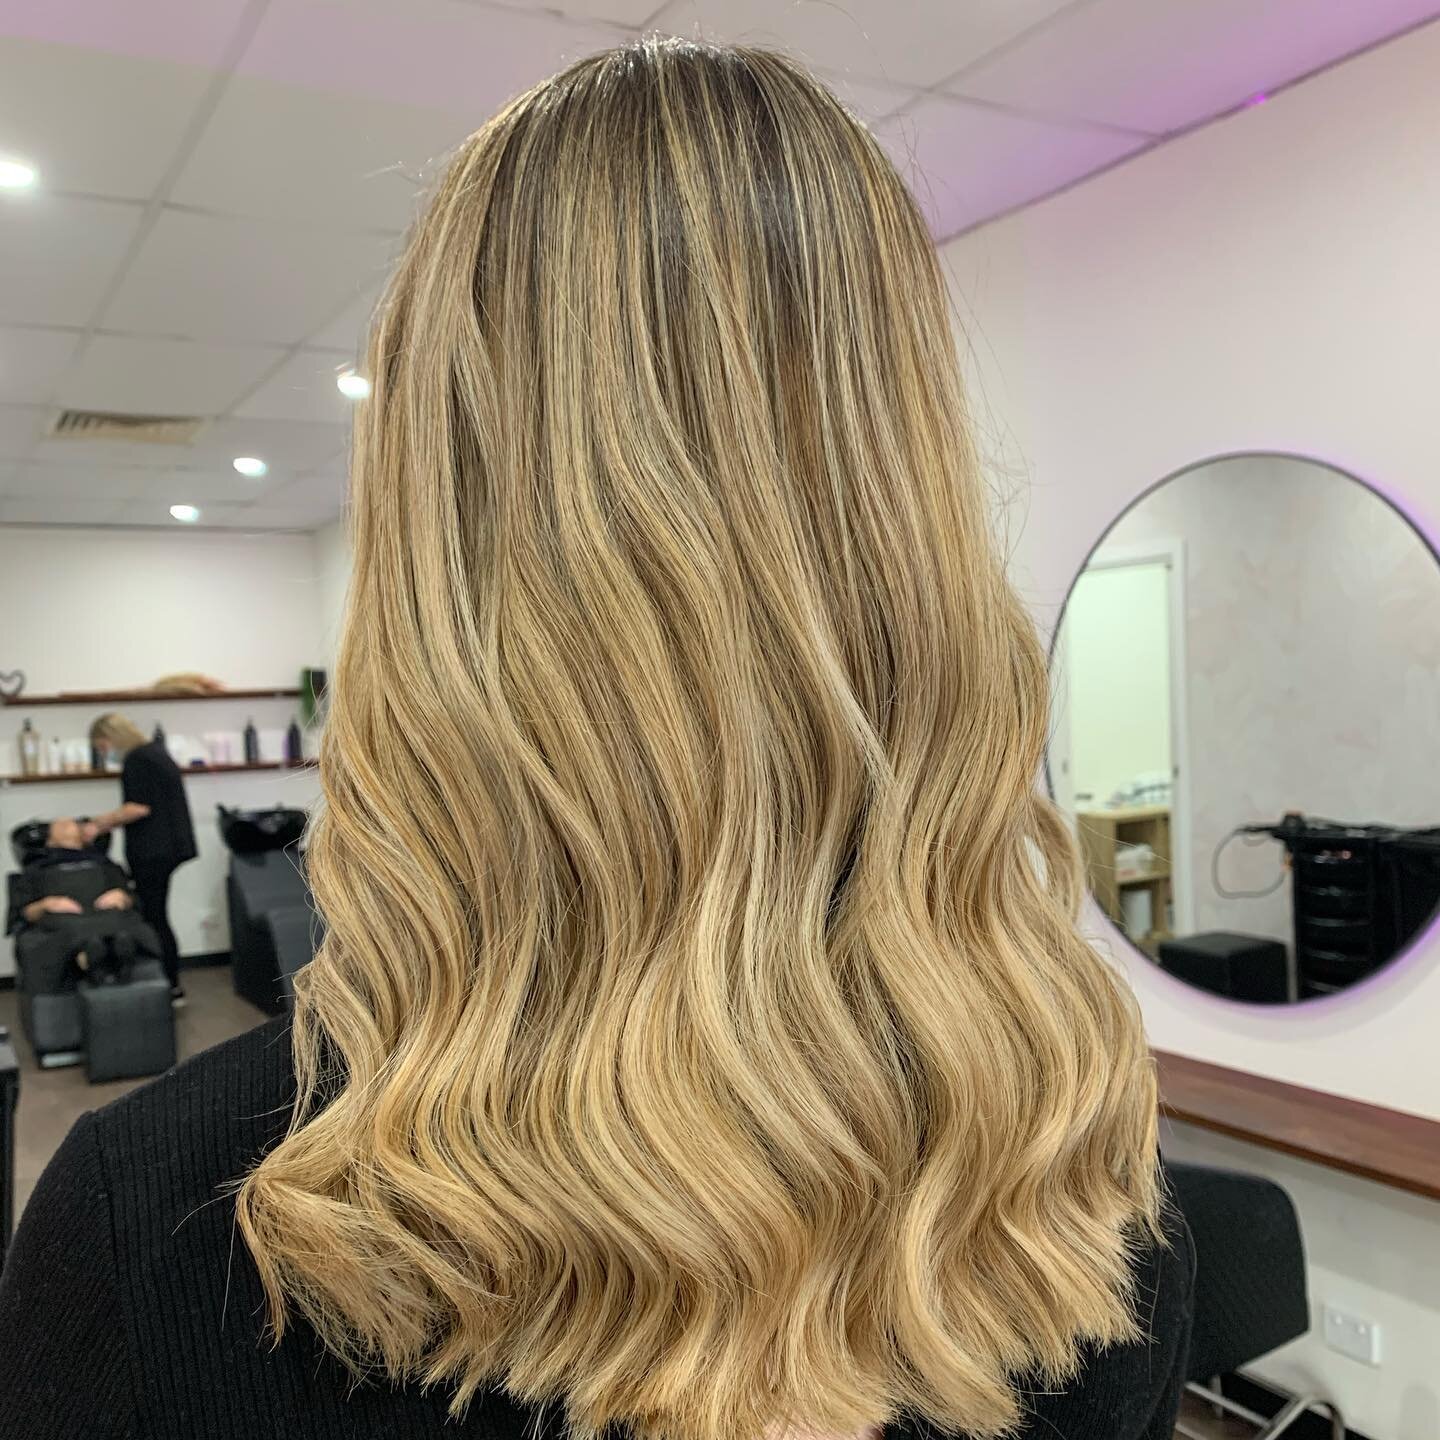 Keeping it fresh and clean with this gorgeous blonde. Swipe for before. DM or call to book.